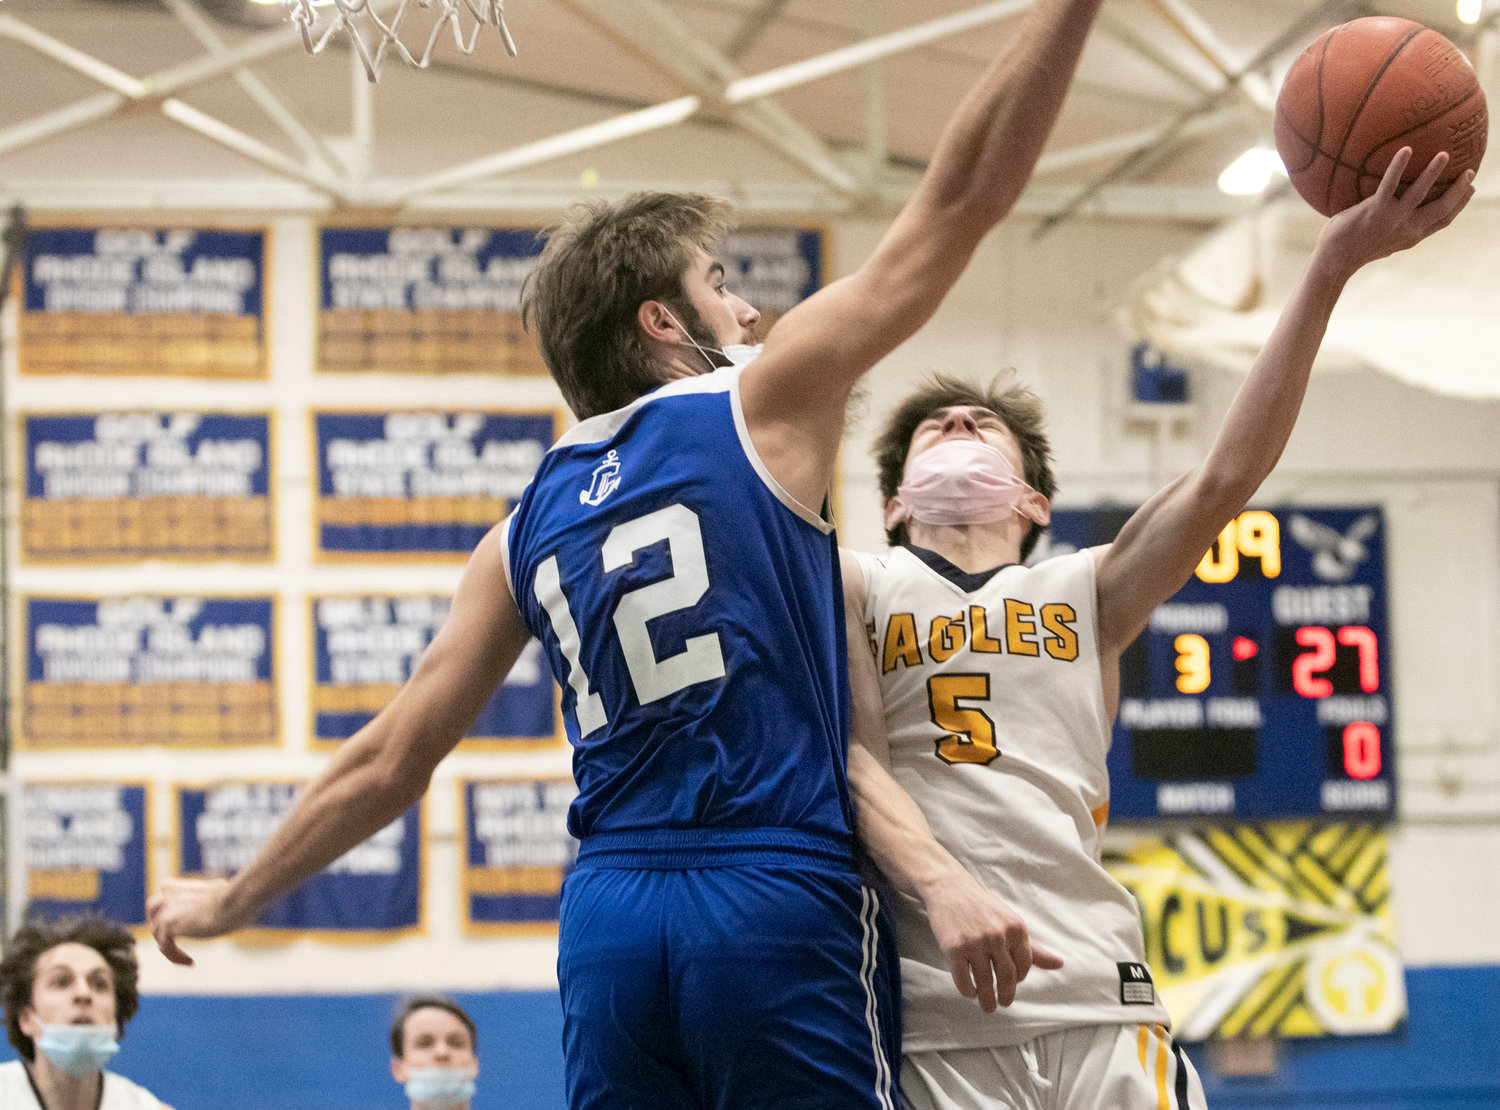 Matt Raffa drives to the basket for a layup late in the second half.